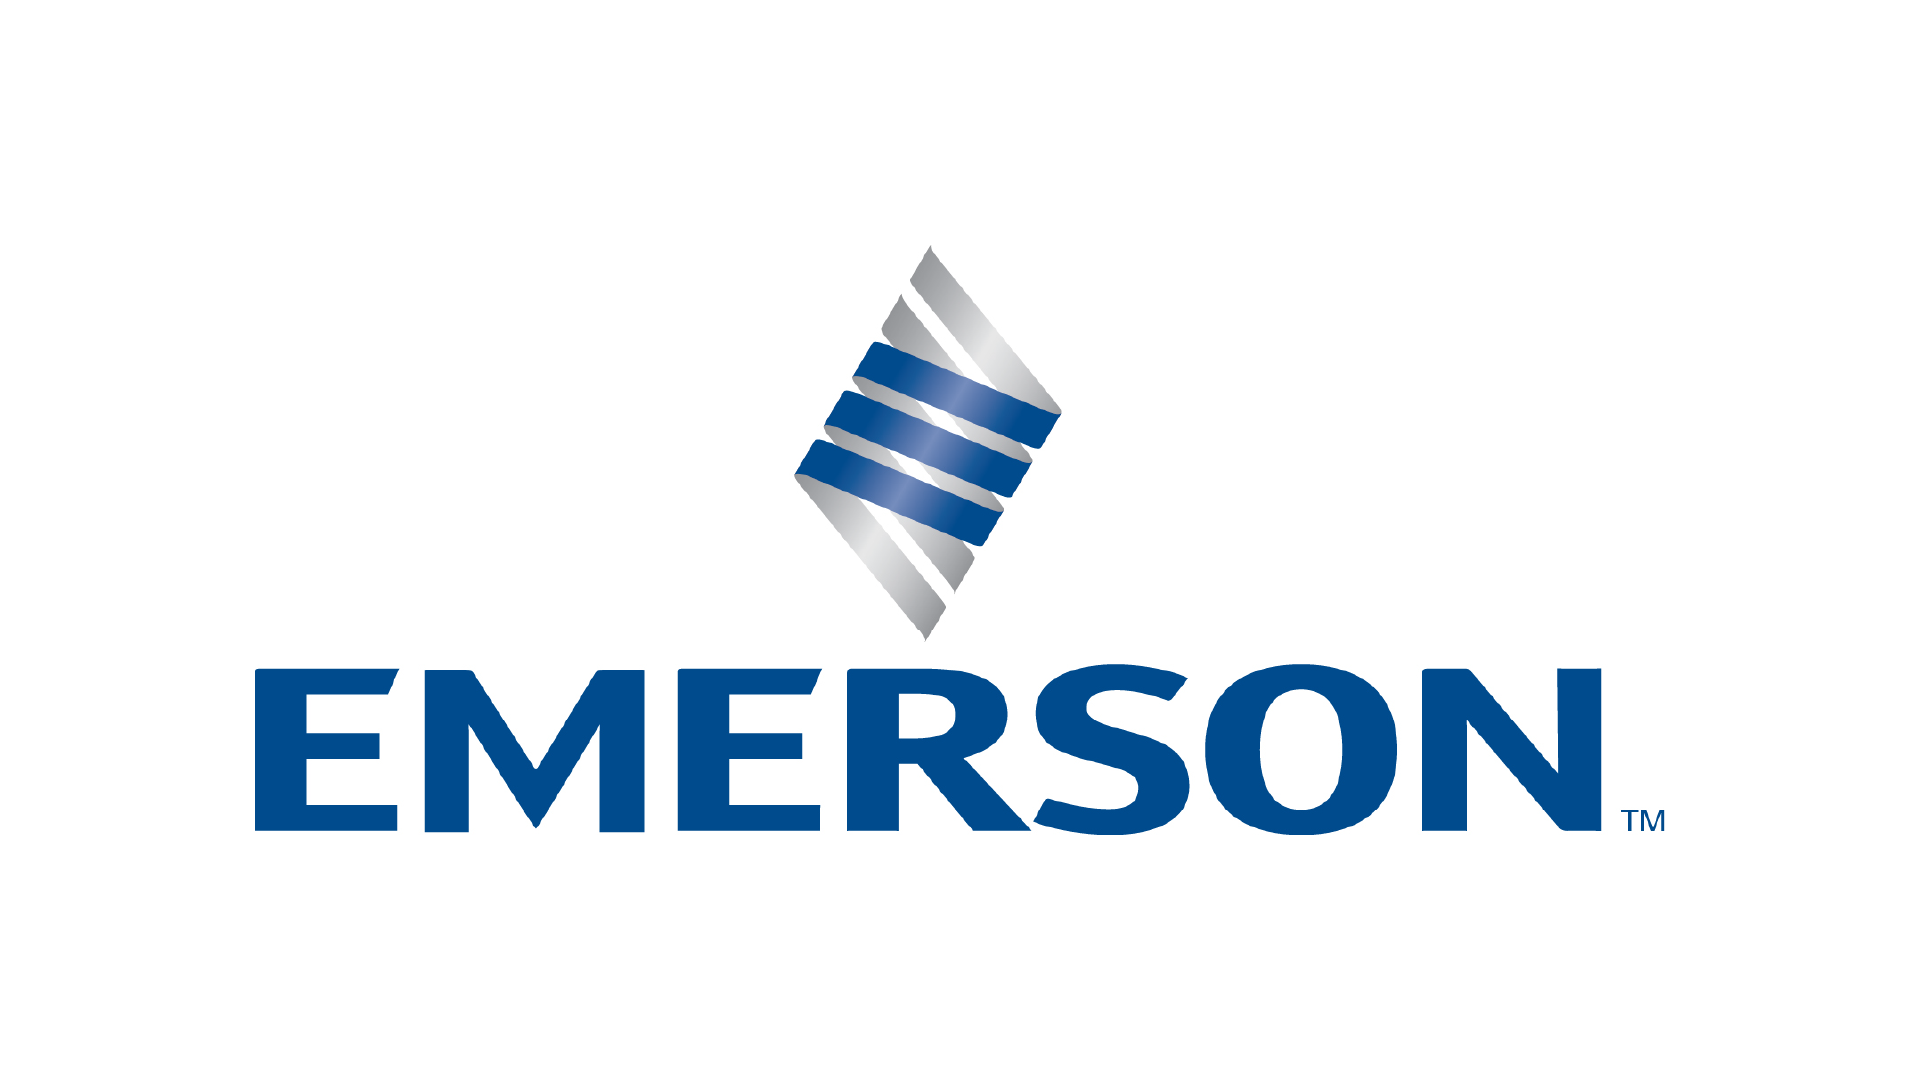 The blue Emerson logo on white background.